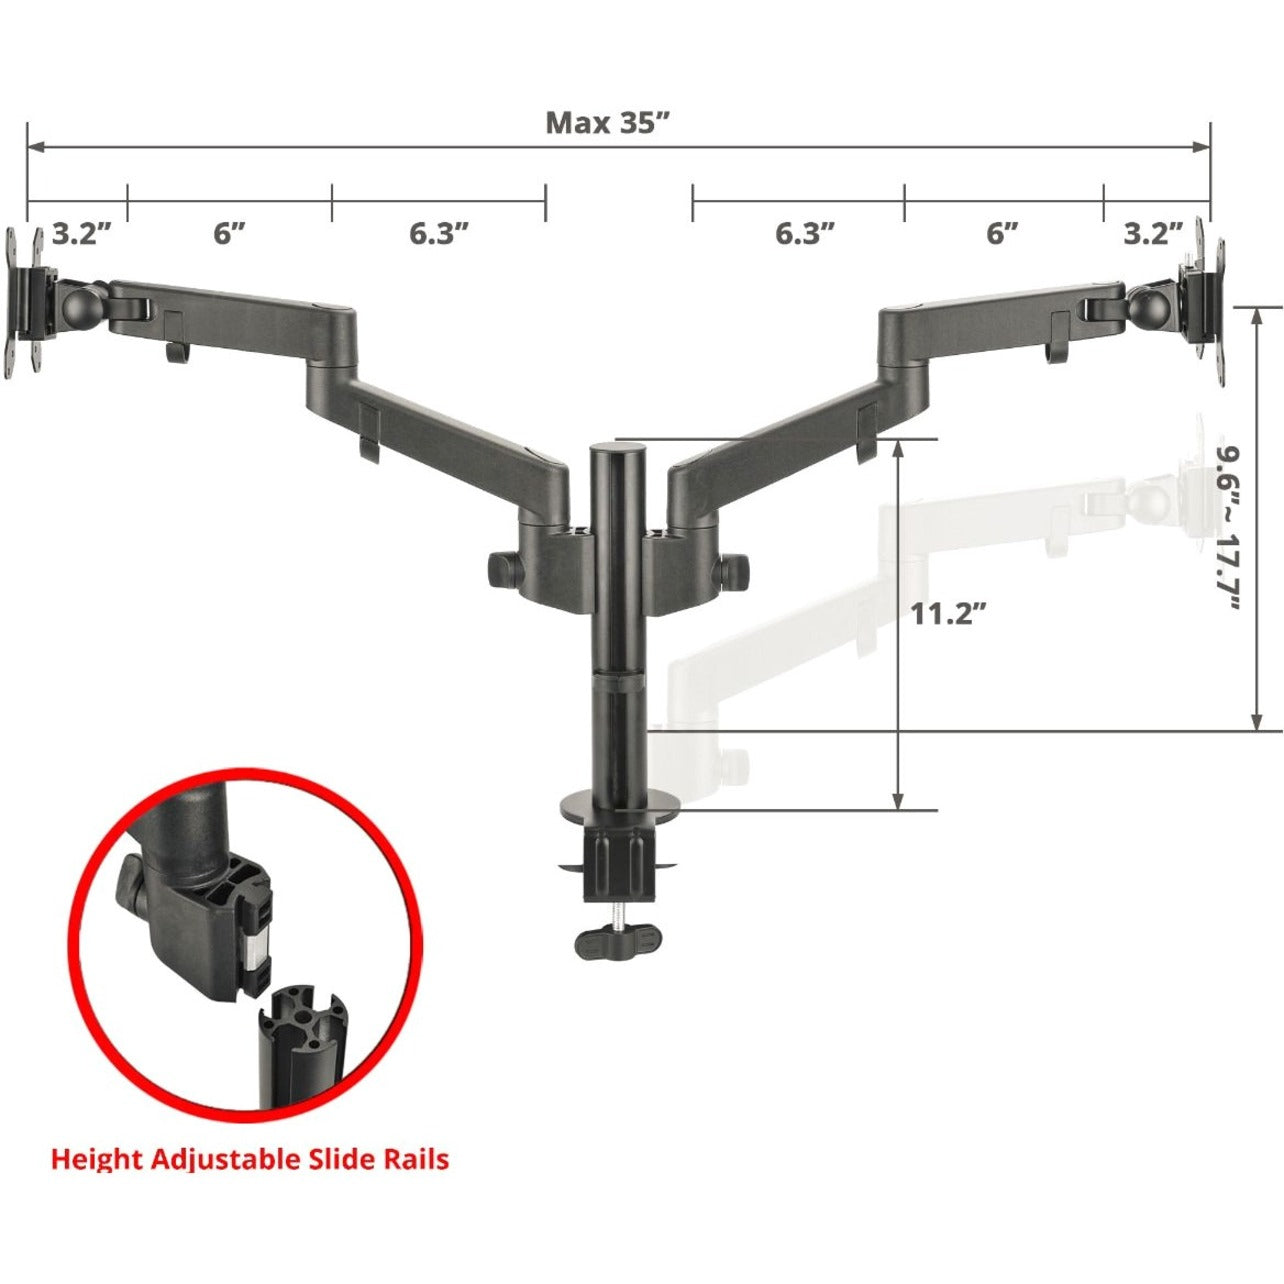 SIIG CE-MT3E11-S1 Single Pole Multi-Angle Articulating Arm Dual Monitor Desk Mount, Heavy Duty, 14" to 30"